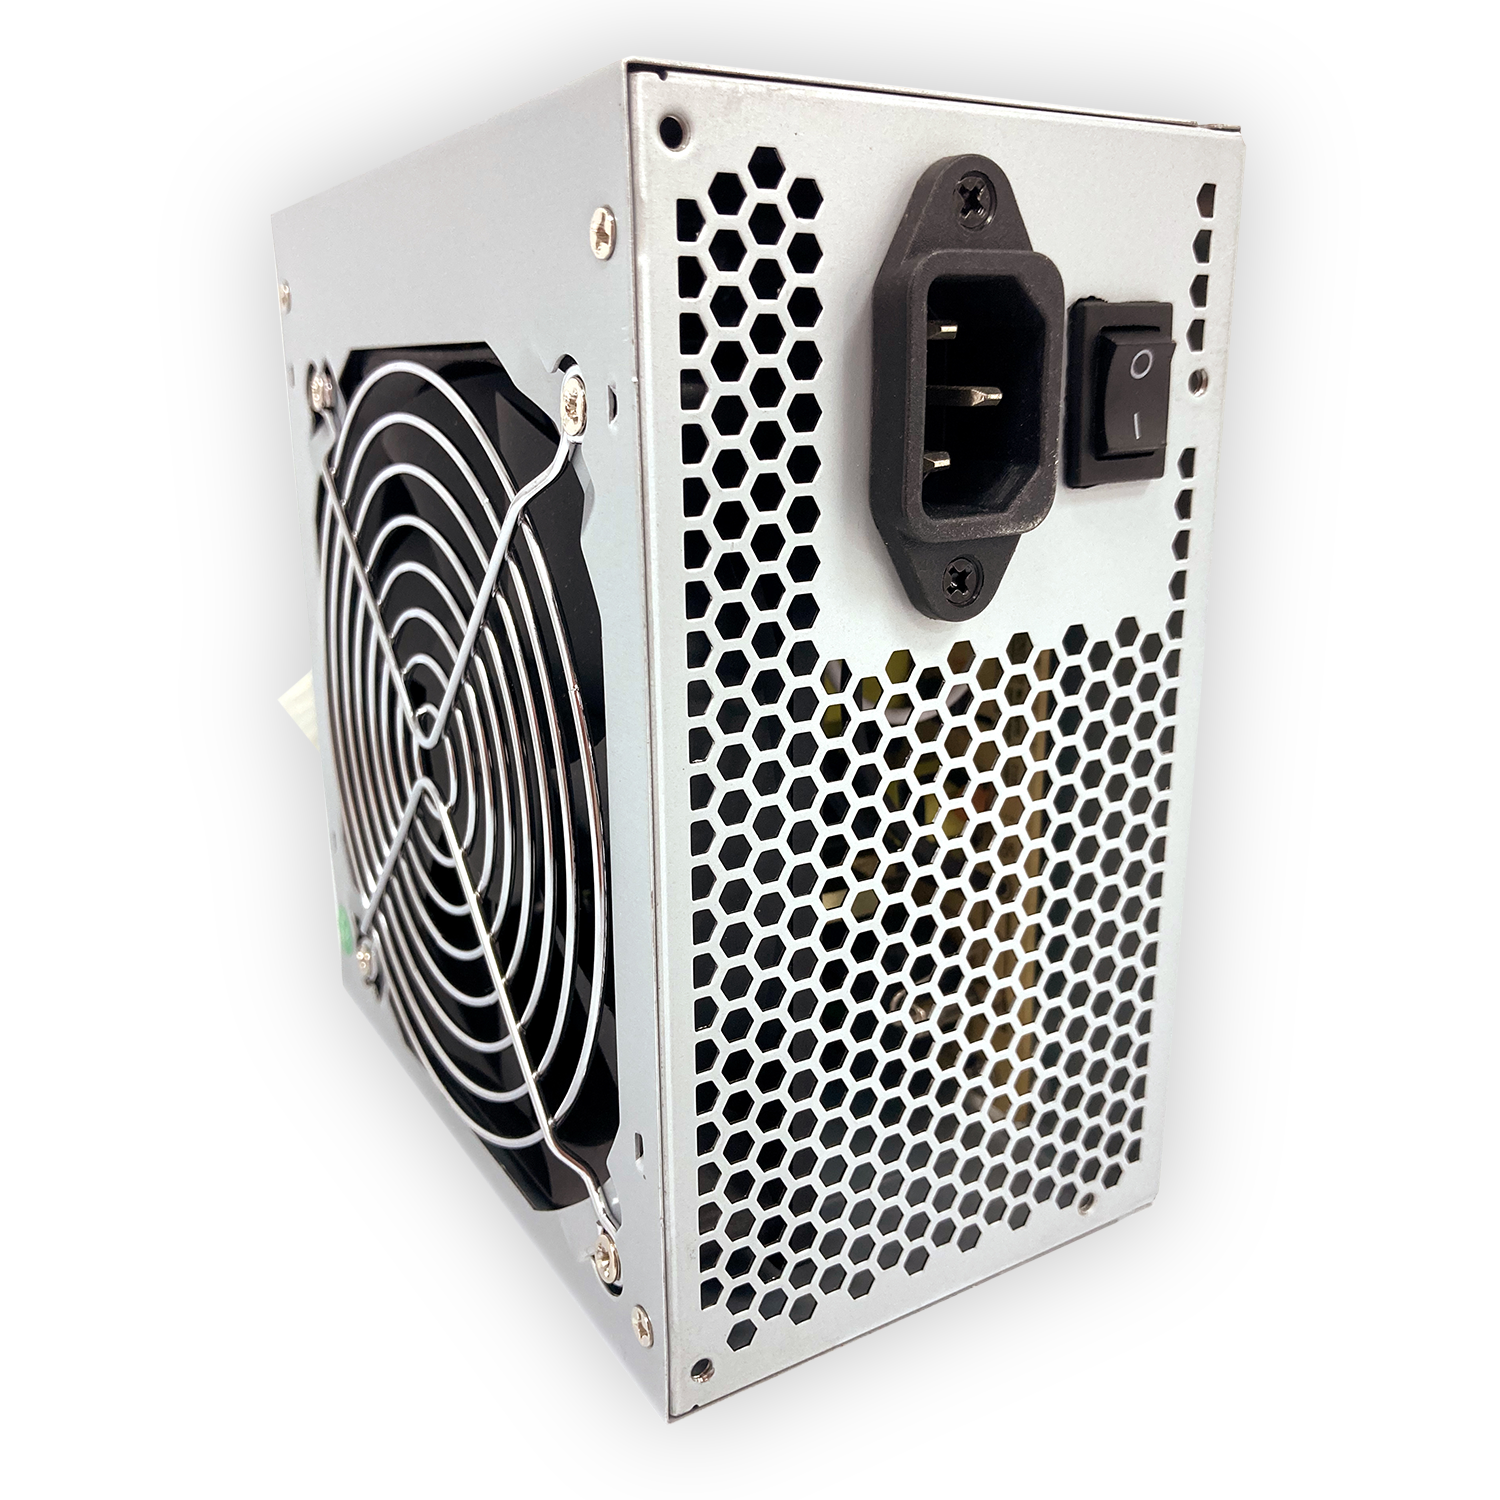 The 600-Watt Power Supply is the standard power supply used in every cabinet.